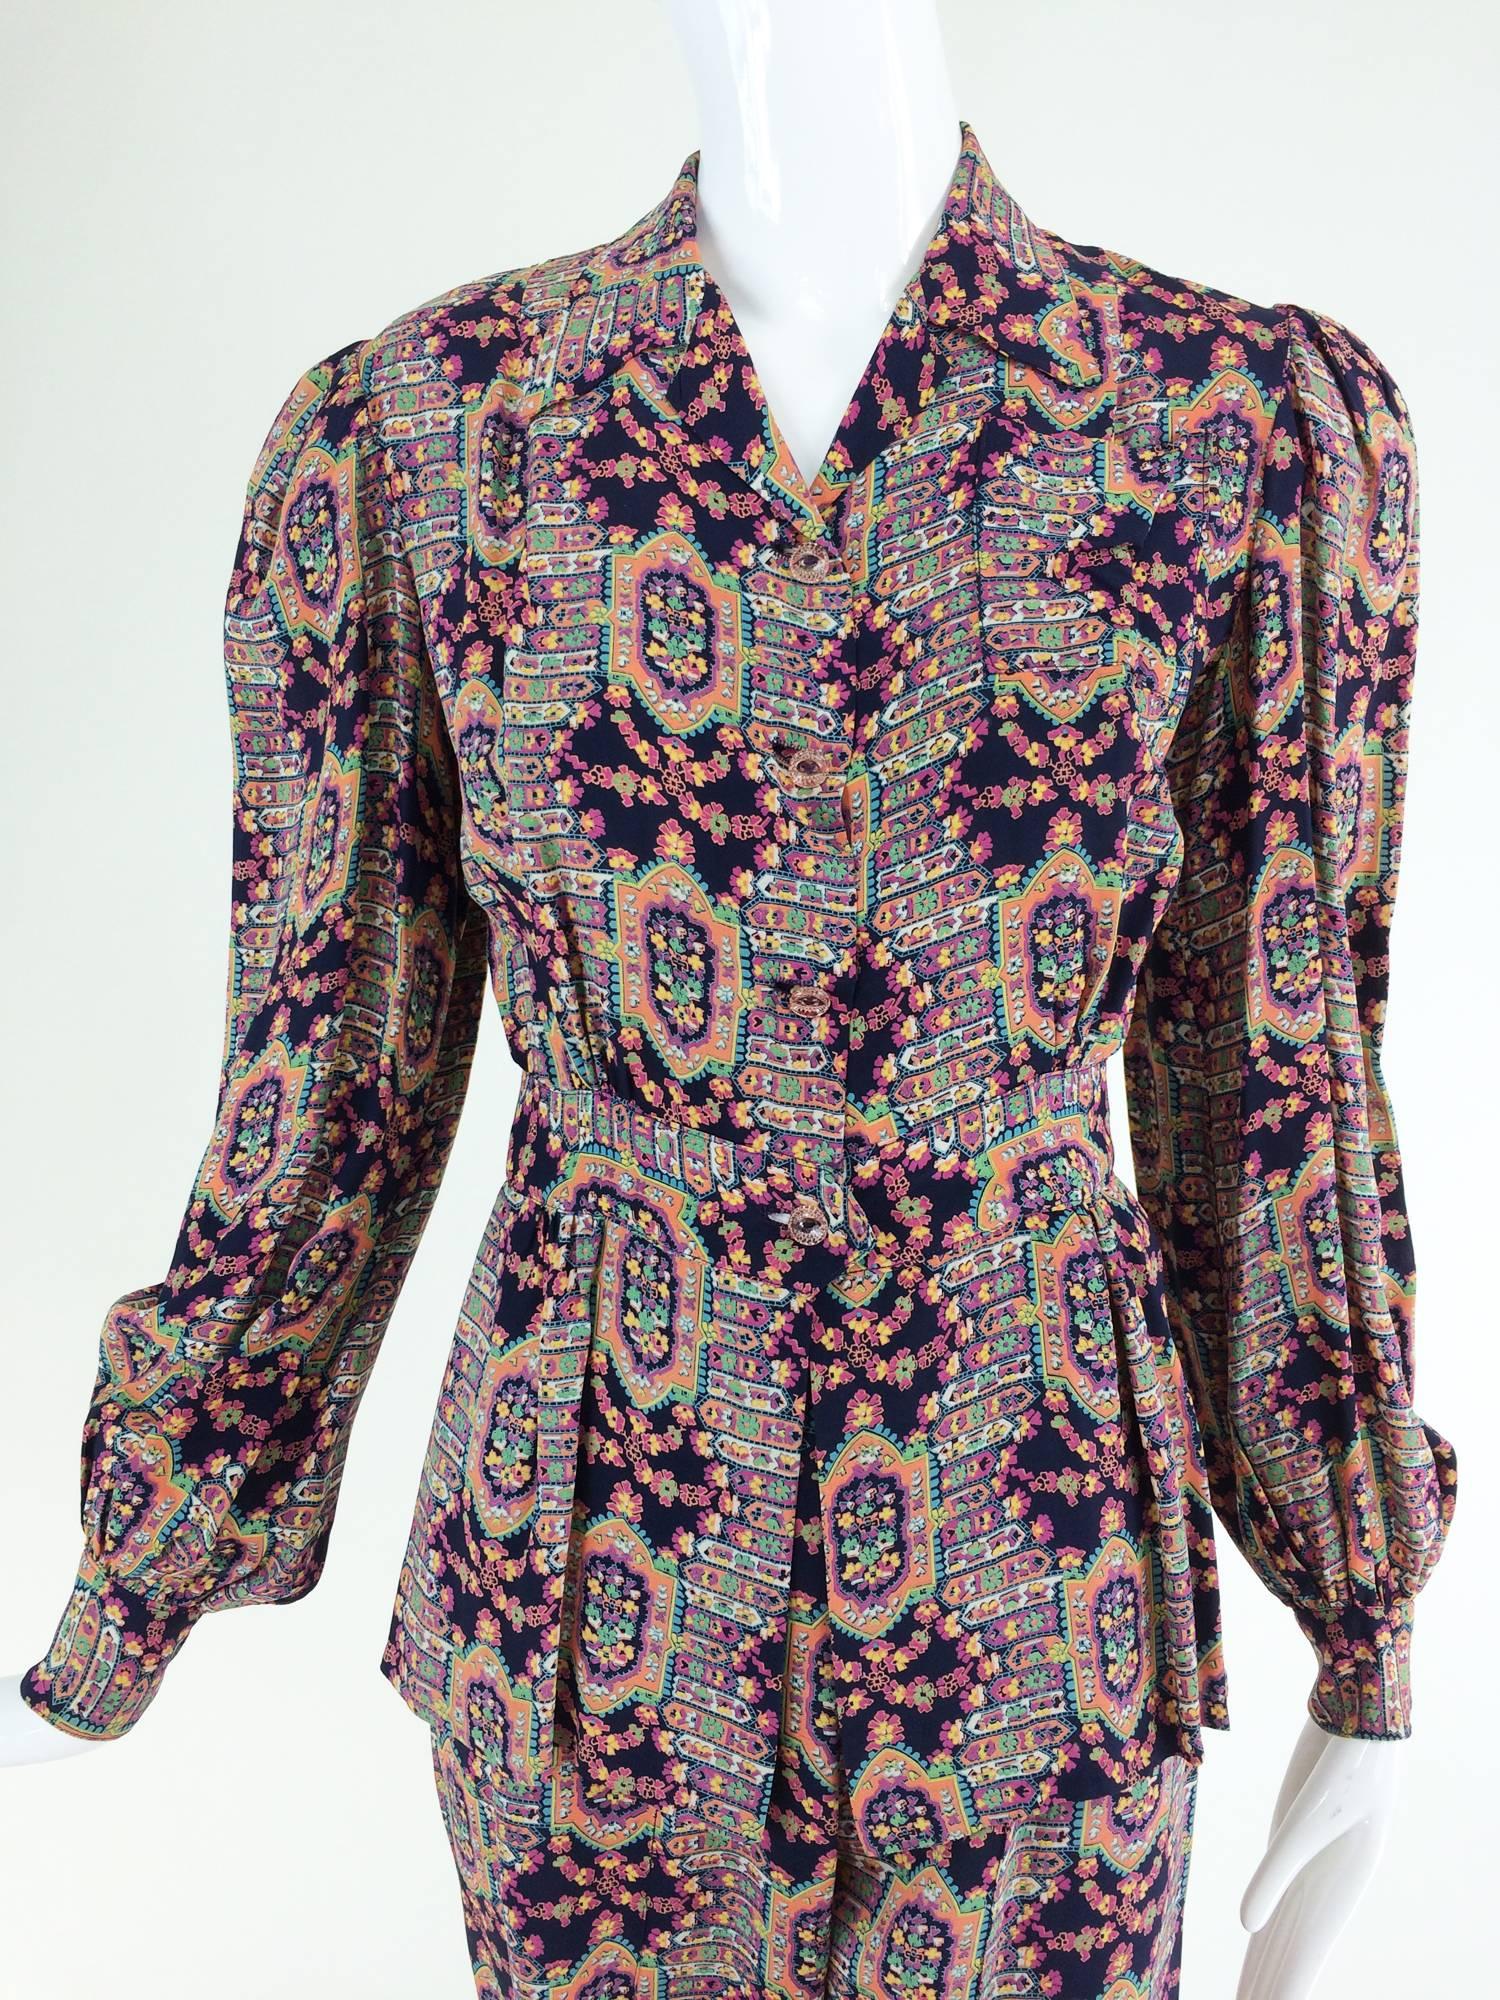 1940s printed rayon pajama dressing...Well made pajama set in a floral print set on a dark navy background...The long sleeve top closes at the front with pale pink clear glass buttons, notched lapel collar, banded waist with a peplum, the long